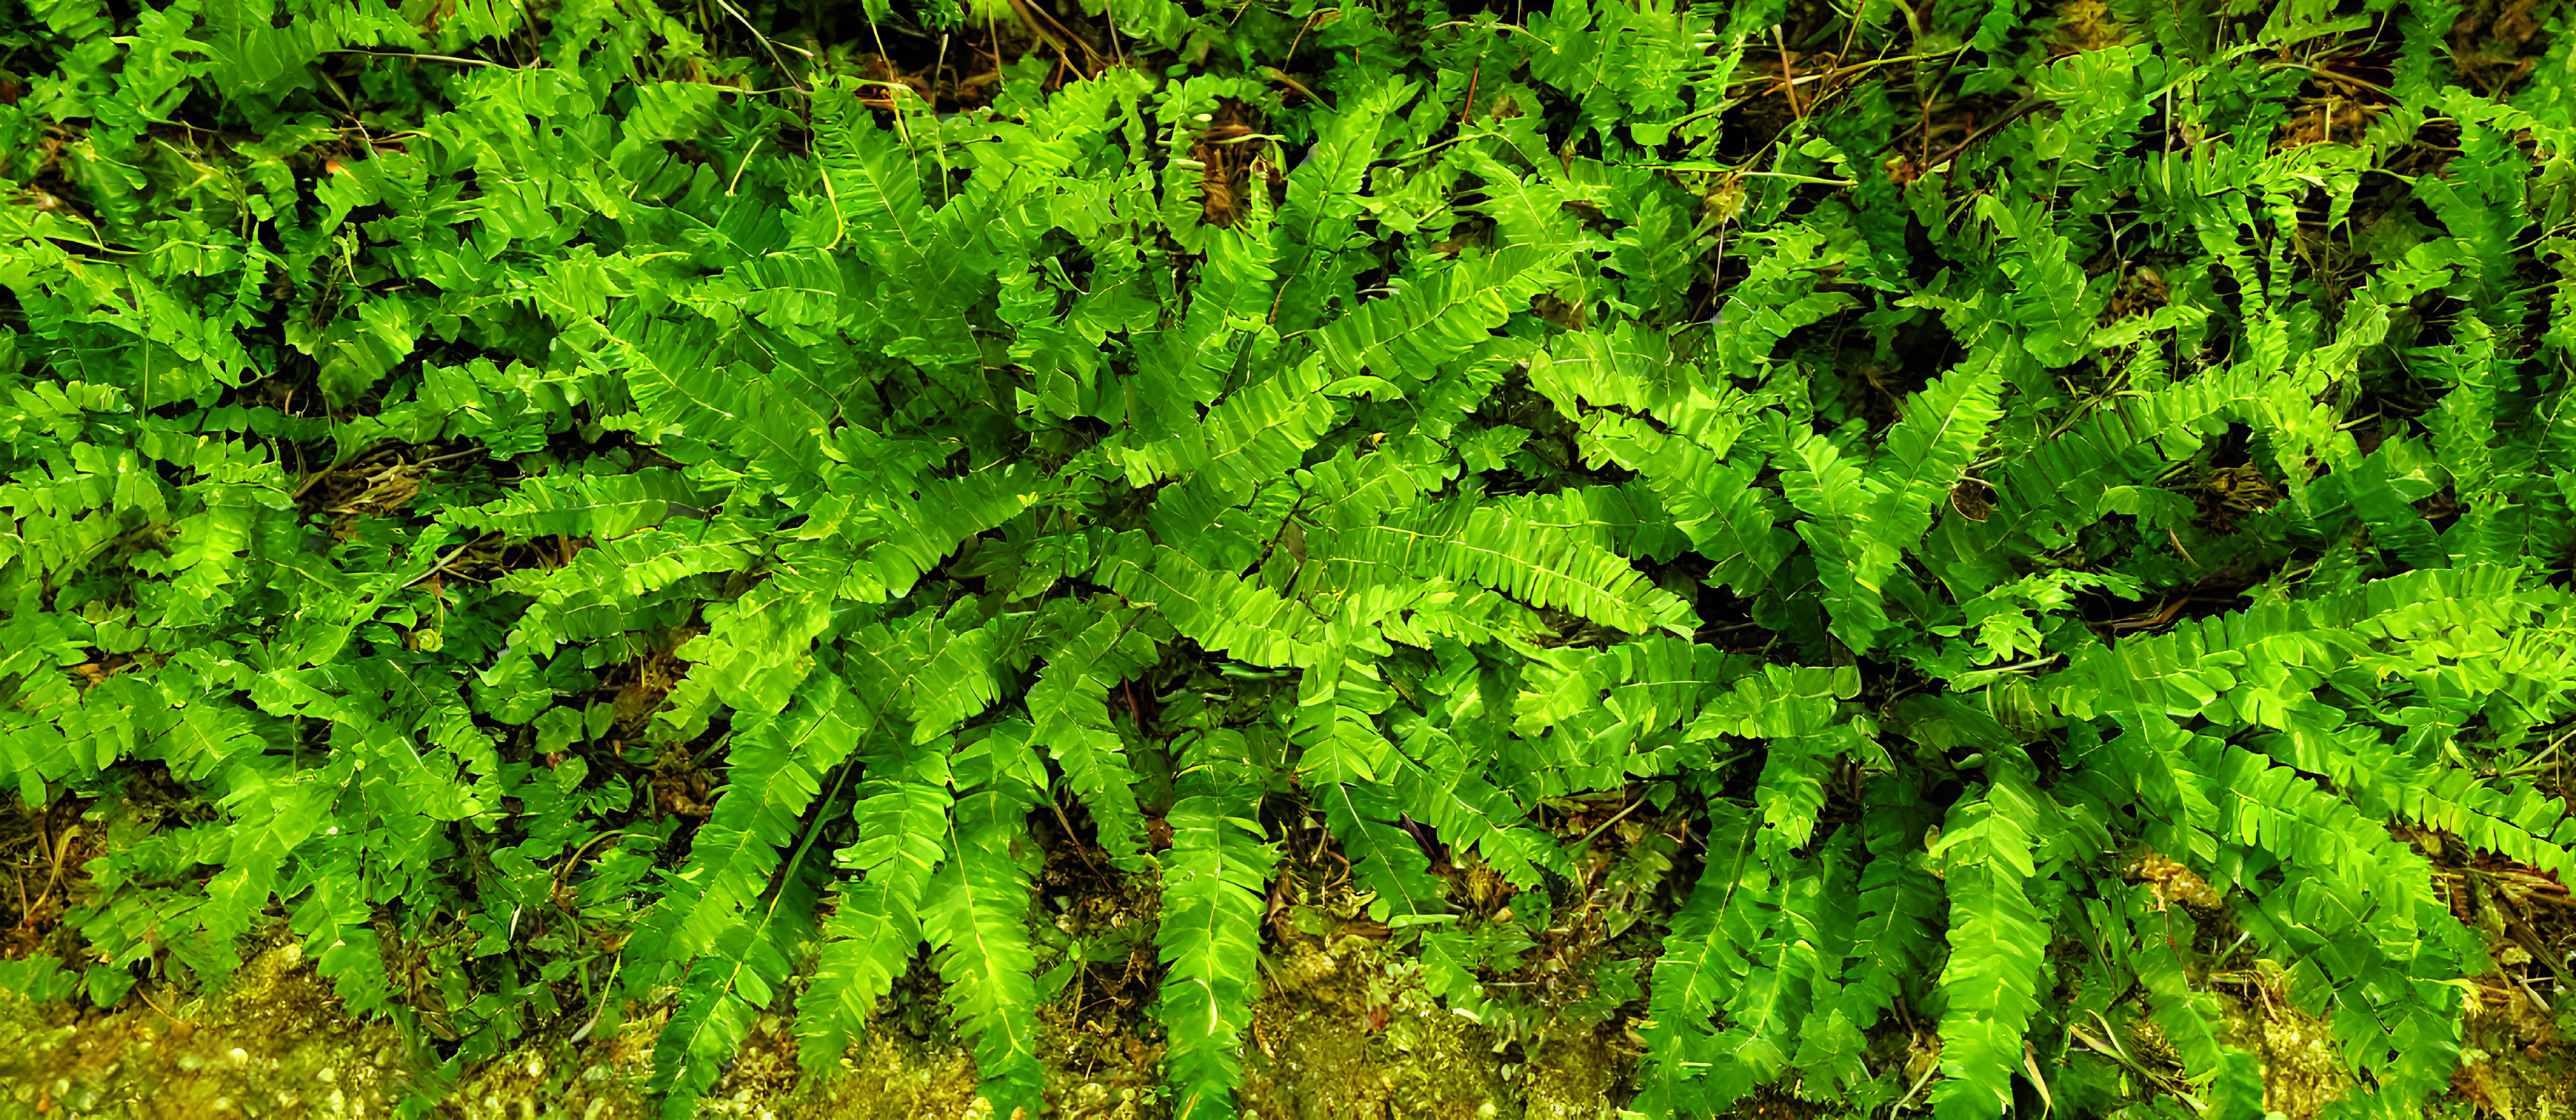 Vibrant green ferns with multiple fronds in a mossy forest setting